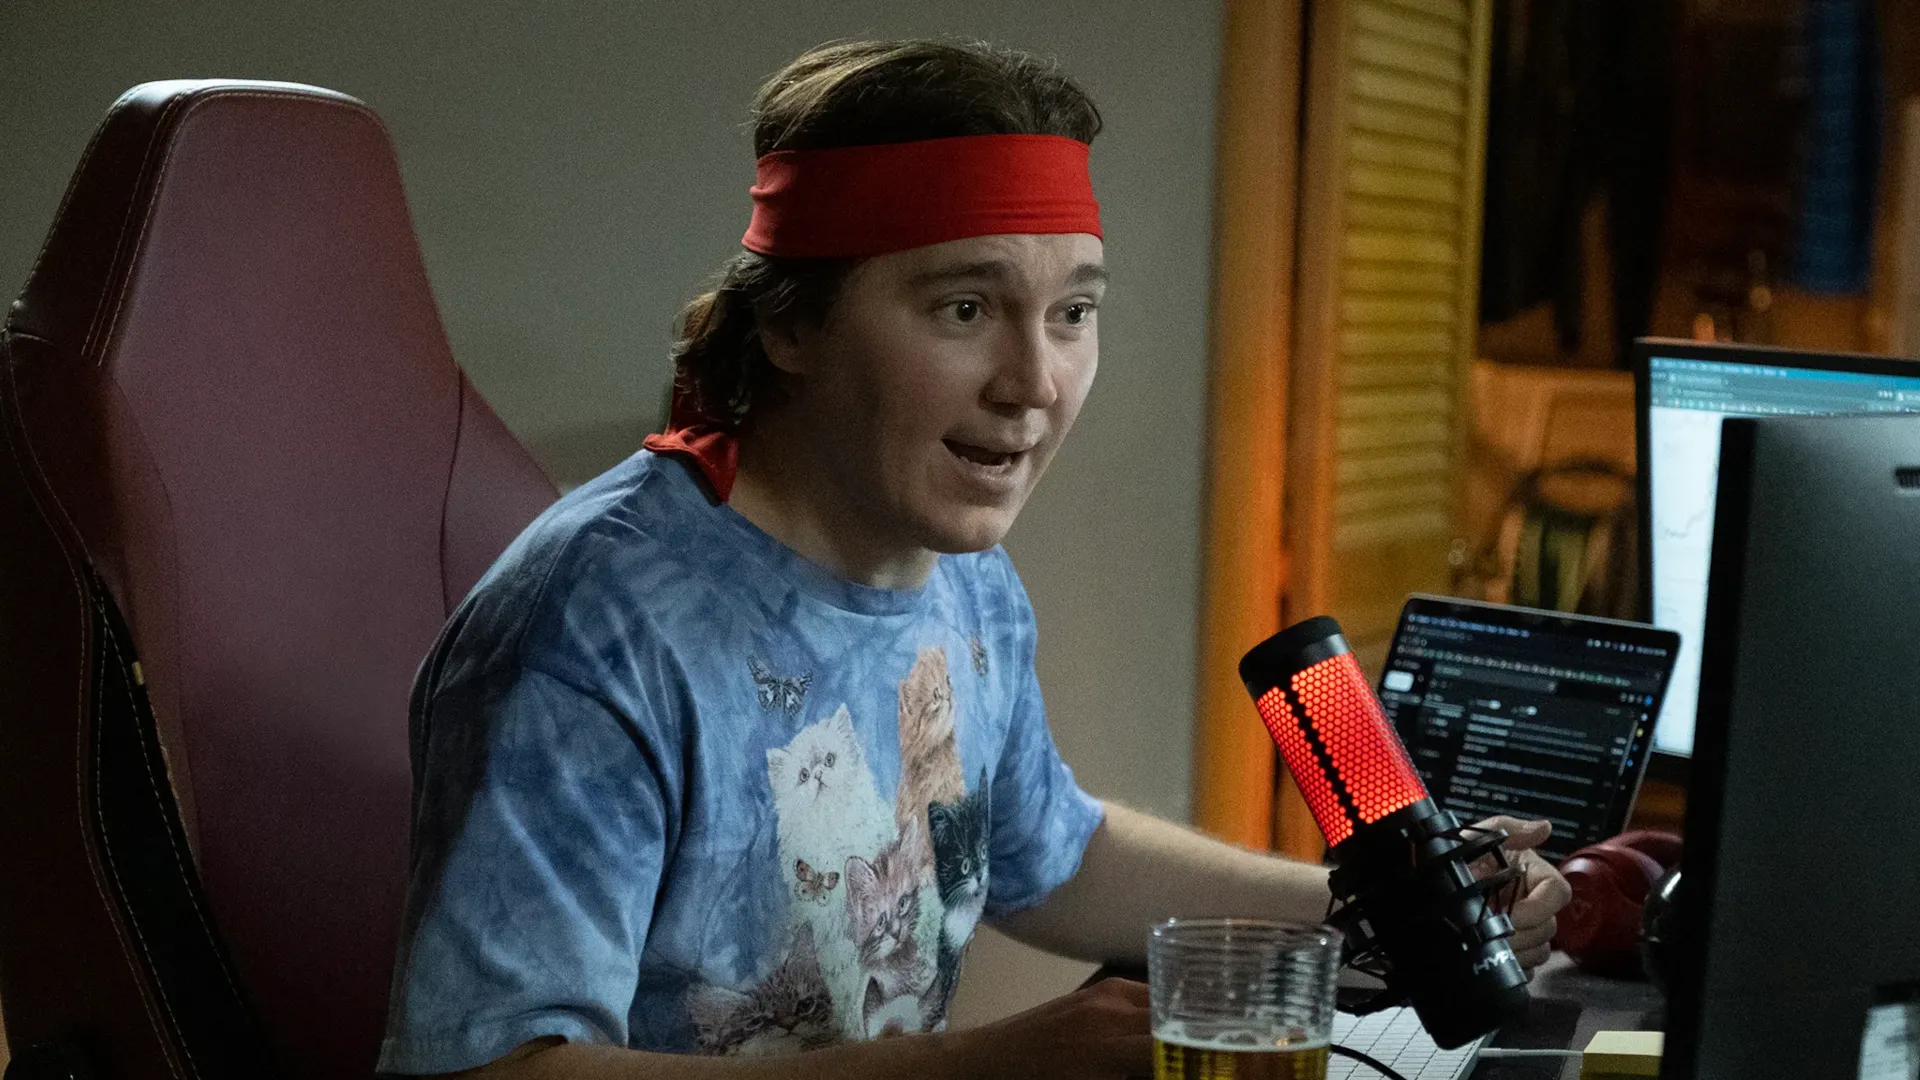 Paul Dano as Roaring Kitty in "Dumb Money." Image: Sony Pictures